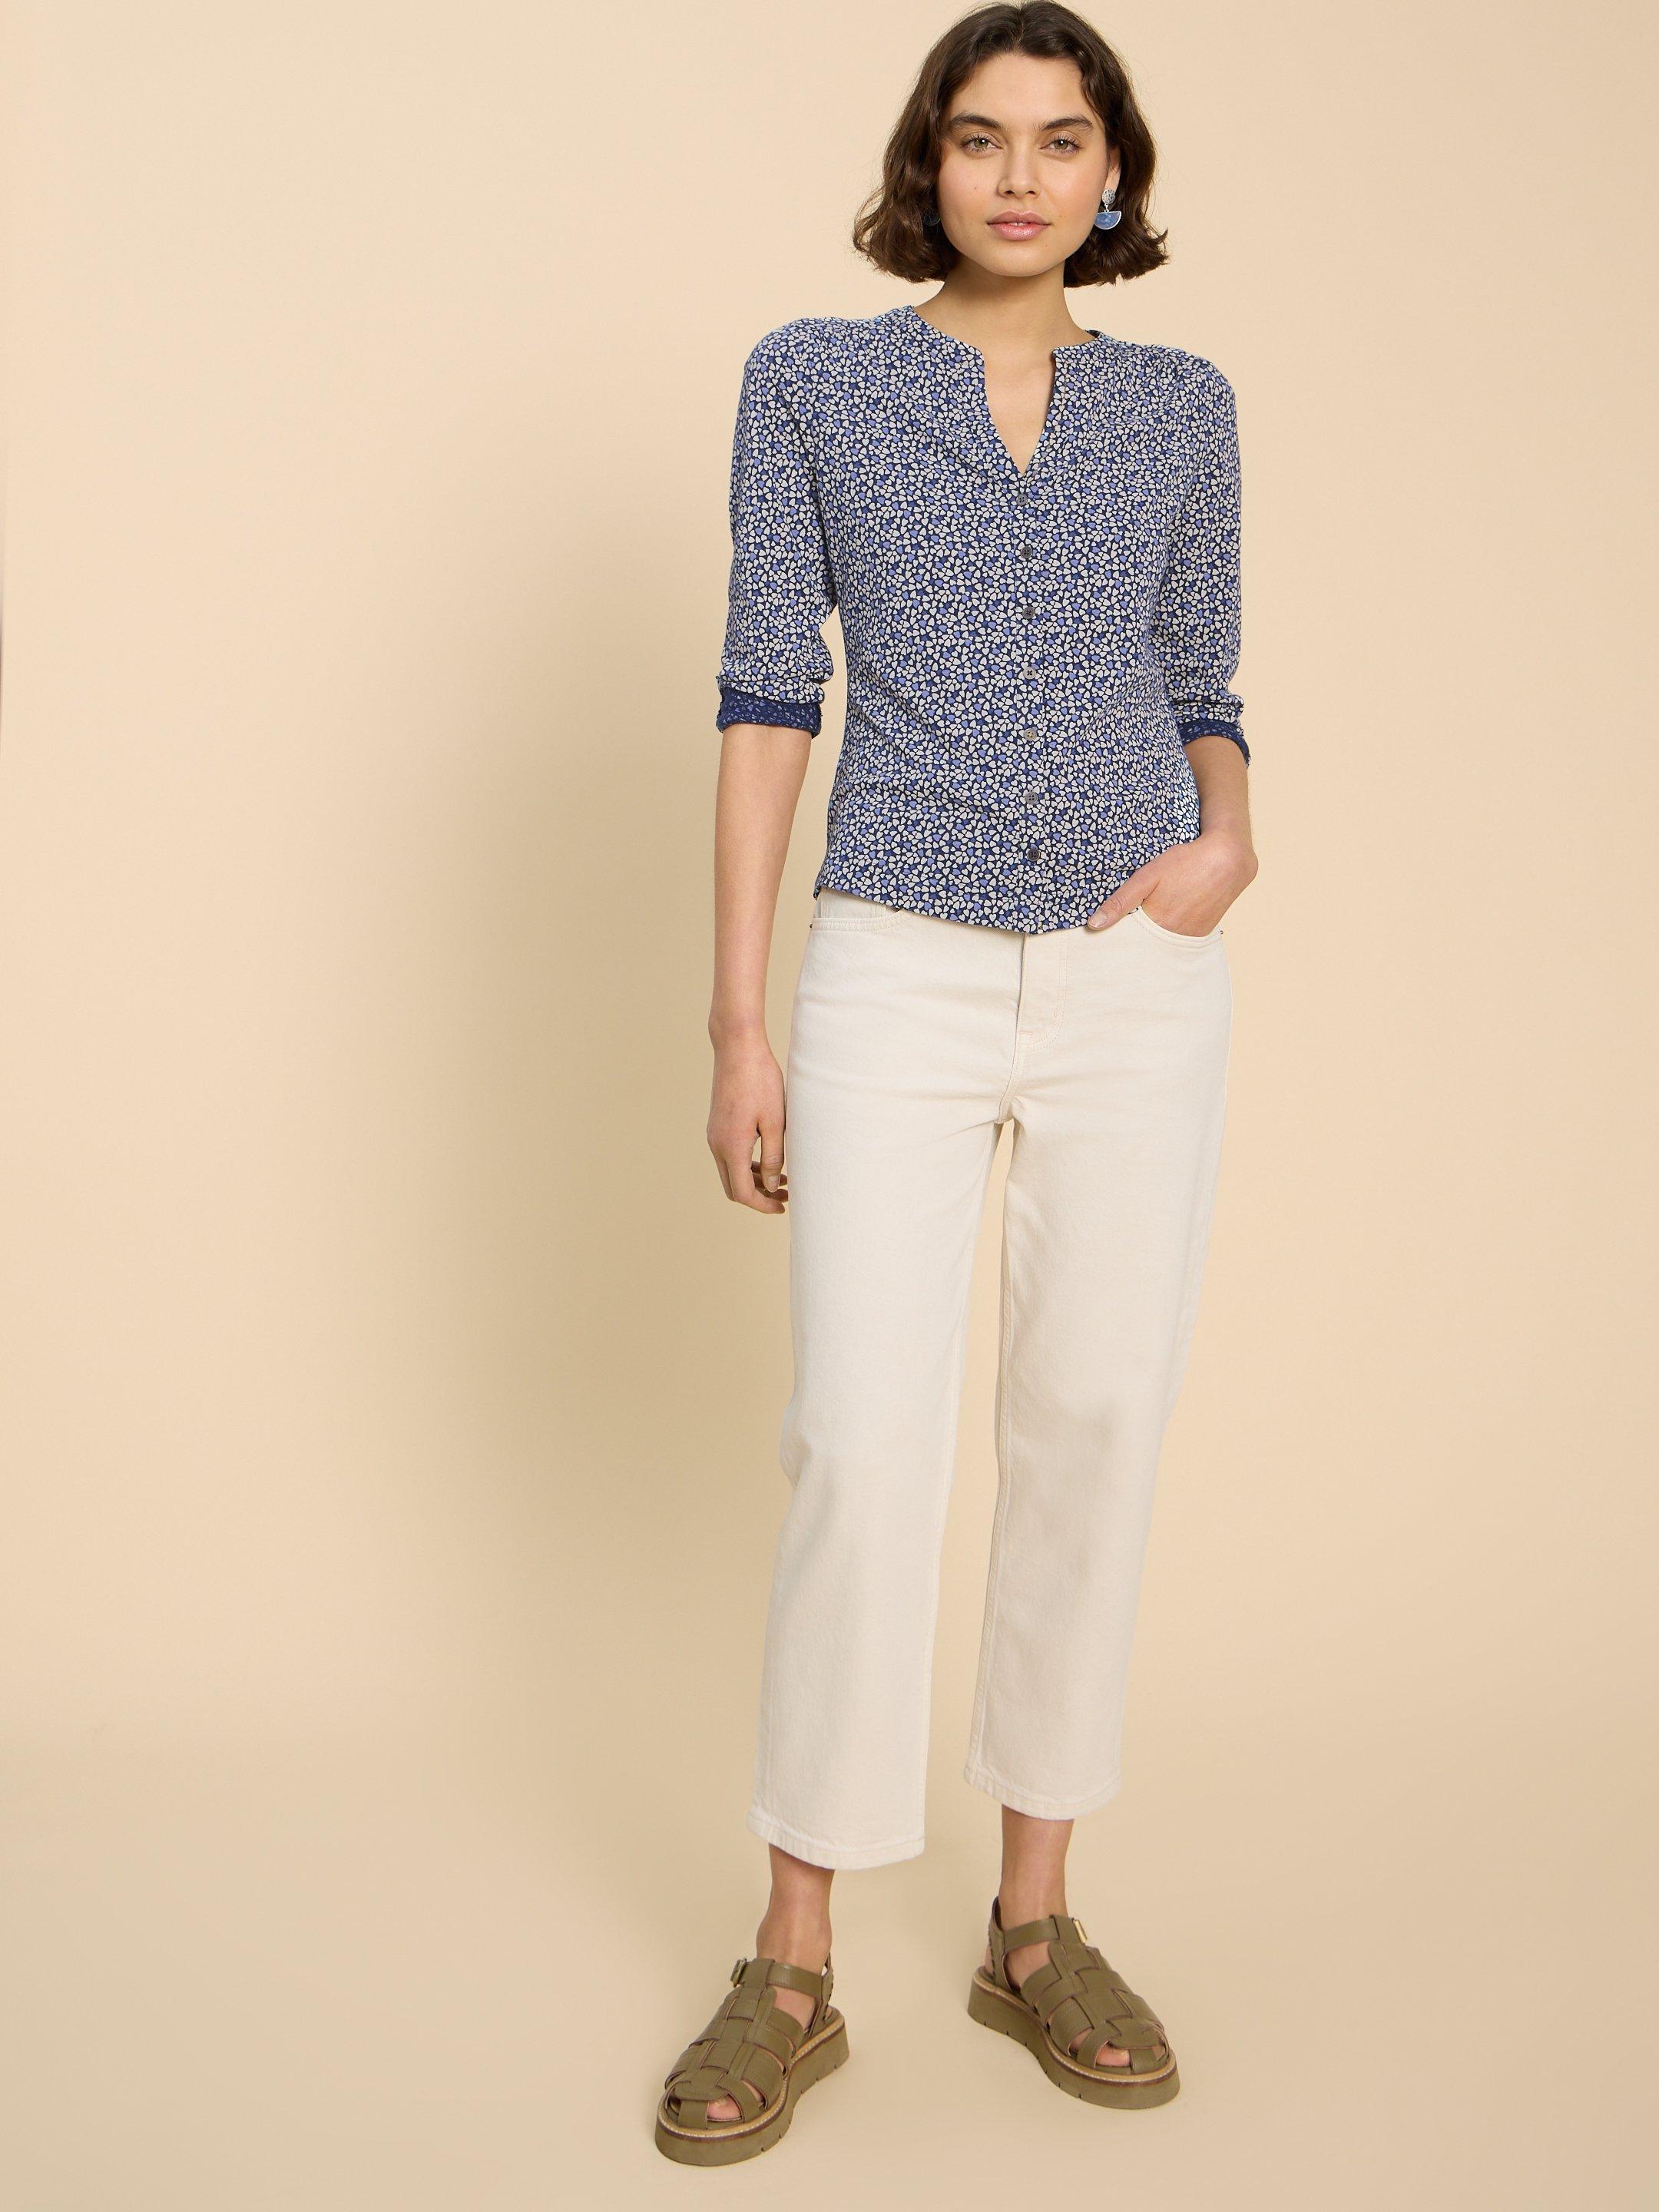 CONNIE COLLARLESS SHIRT in BLUE MLT - MODEL FRONT